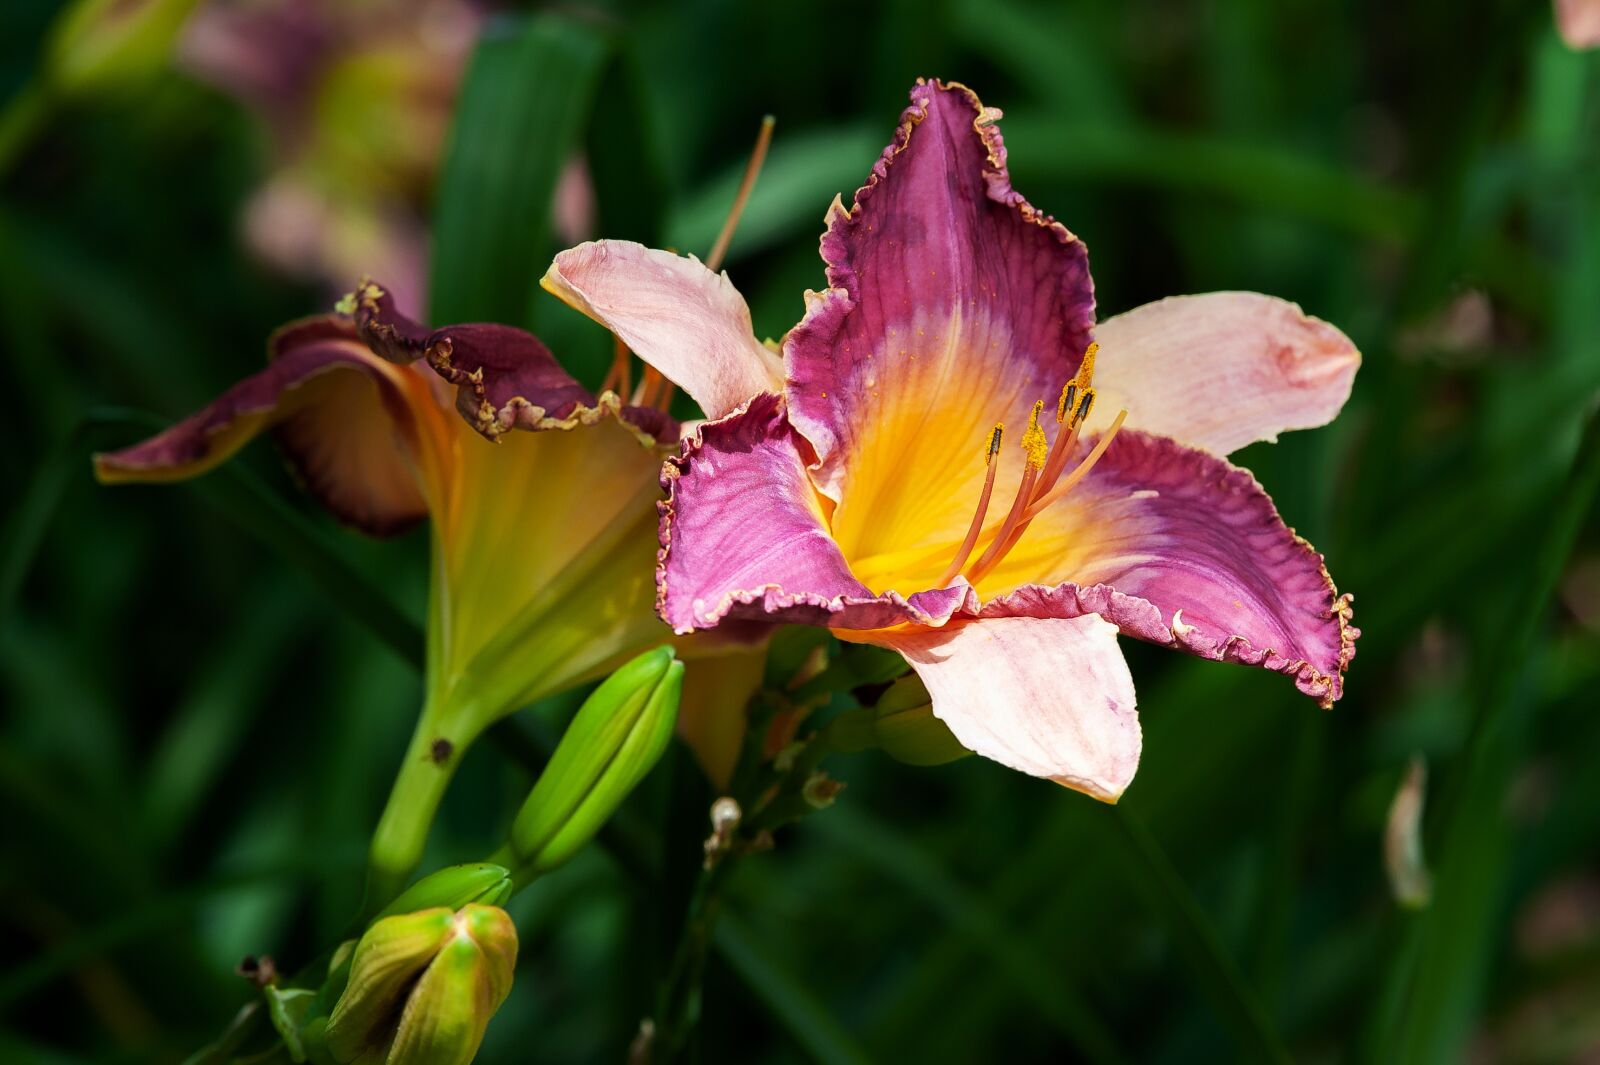 Tamron SP 70-200mm F2.8 Di VC USD sample photo. Flower, daylily, nature photography